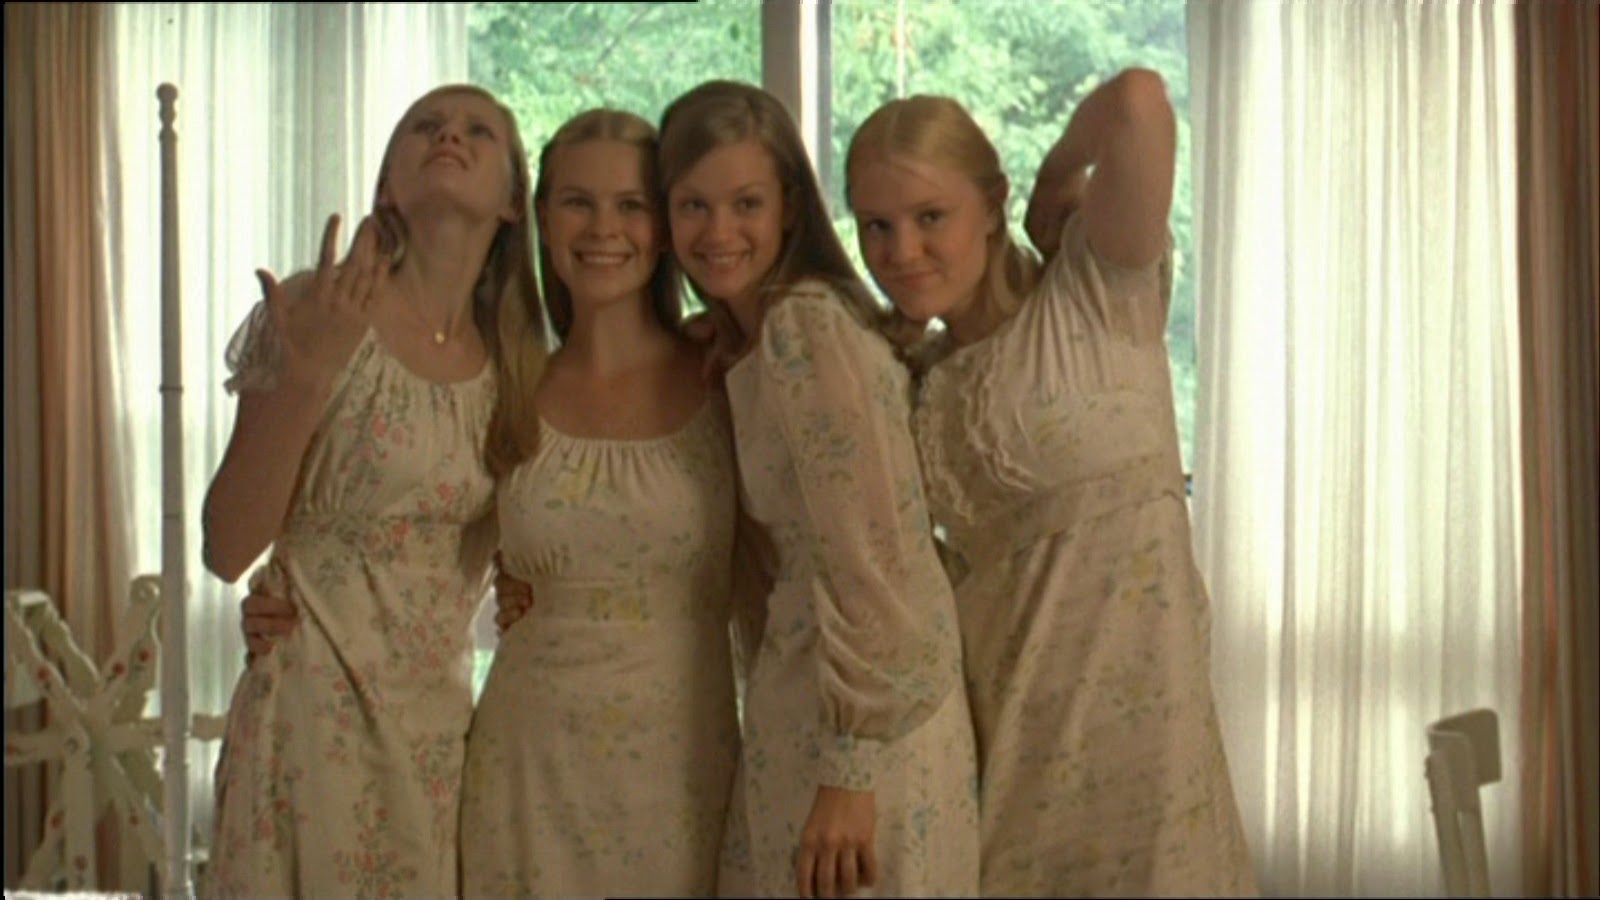 1999 The Virgin Suicides